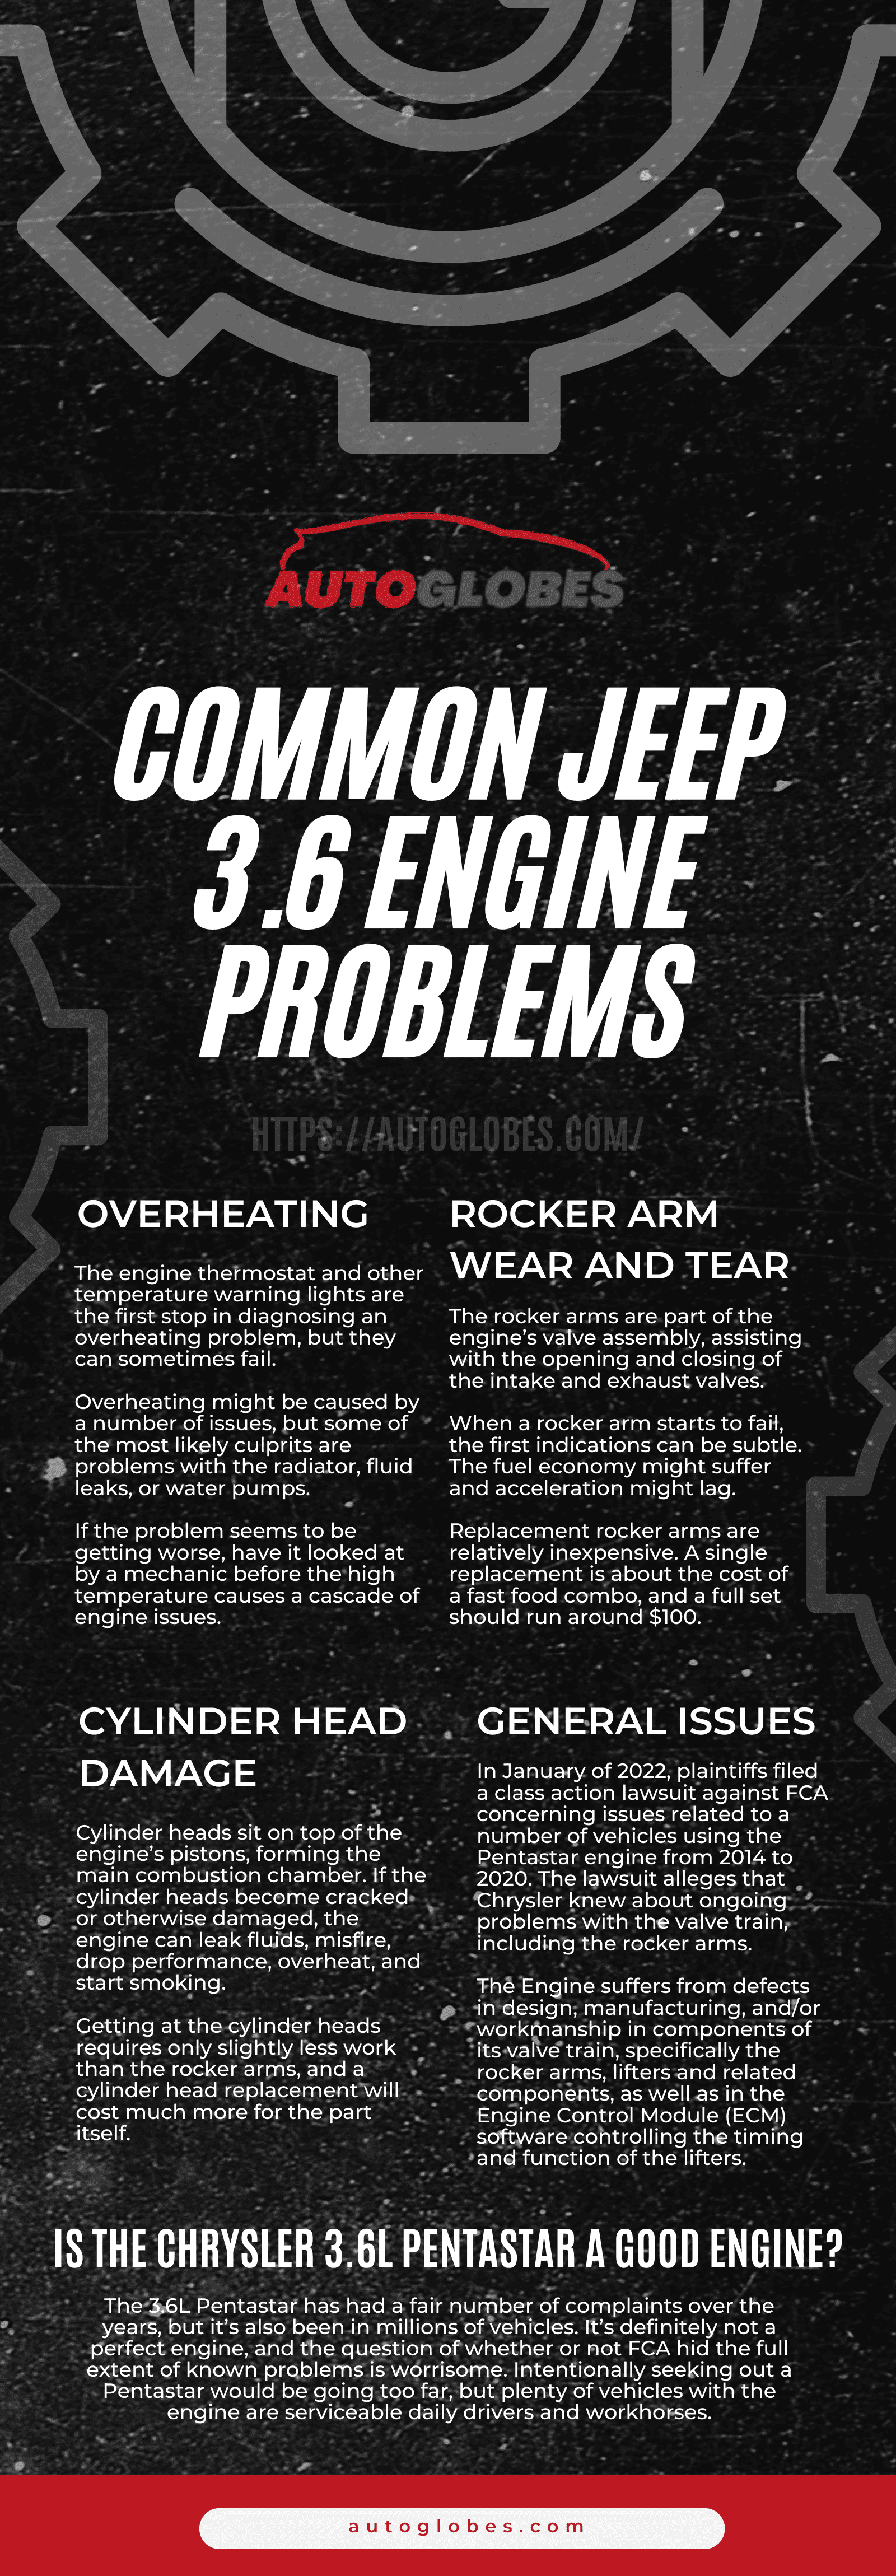 Common Jeep 3.6 Engine Problems infographic